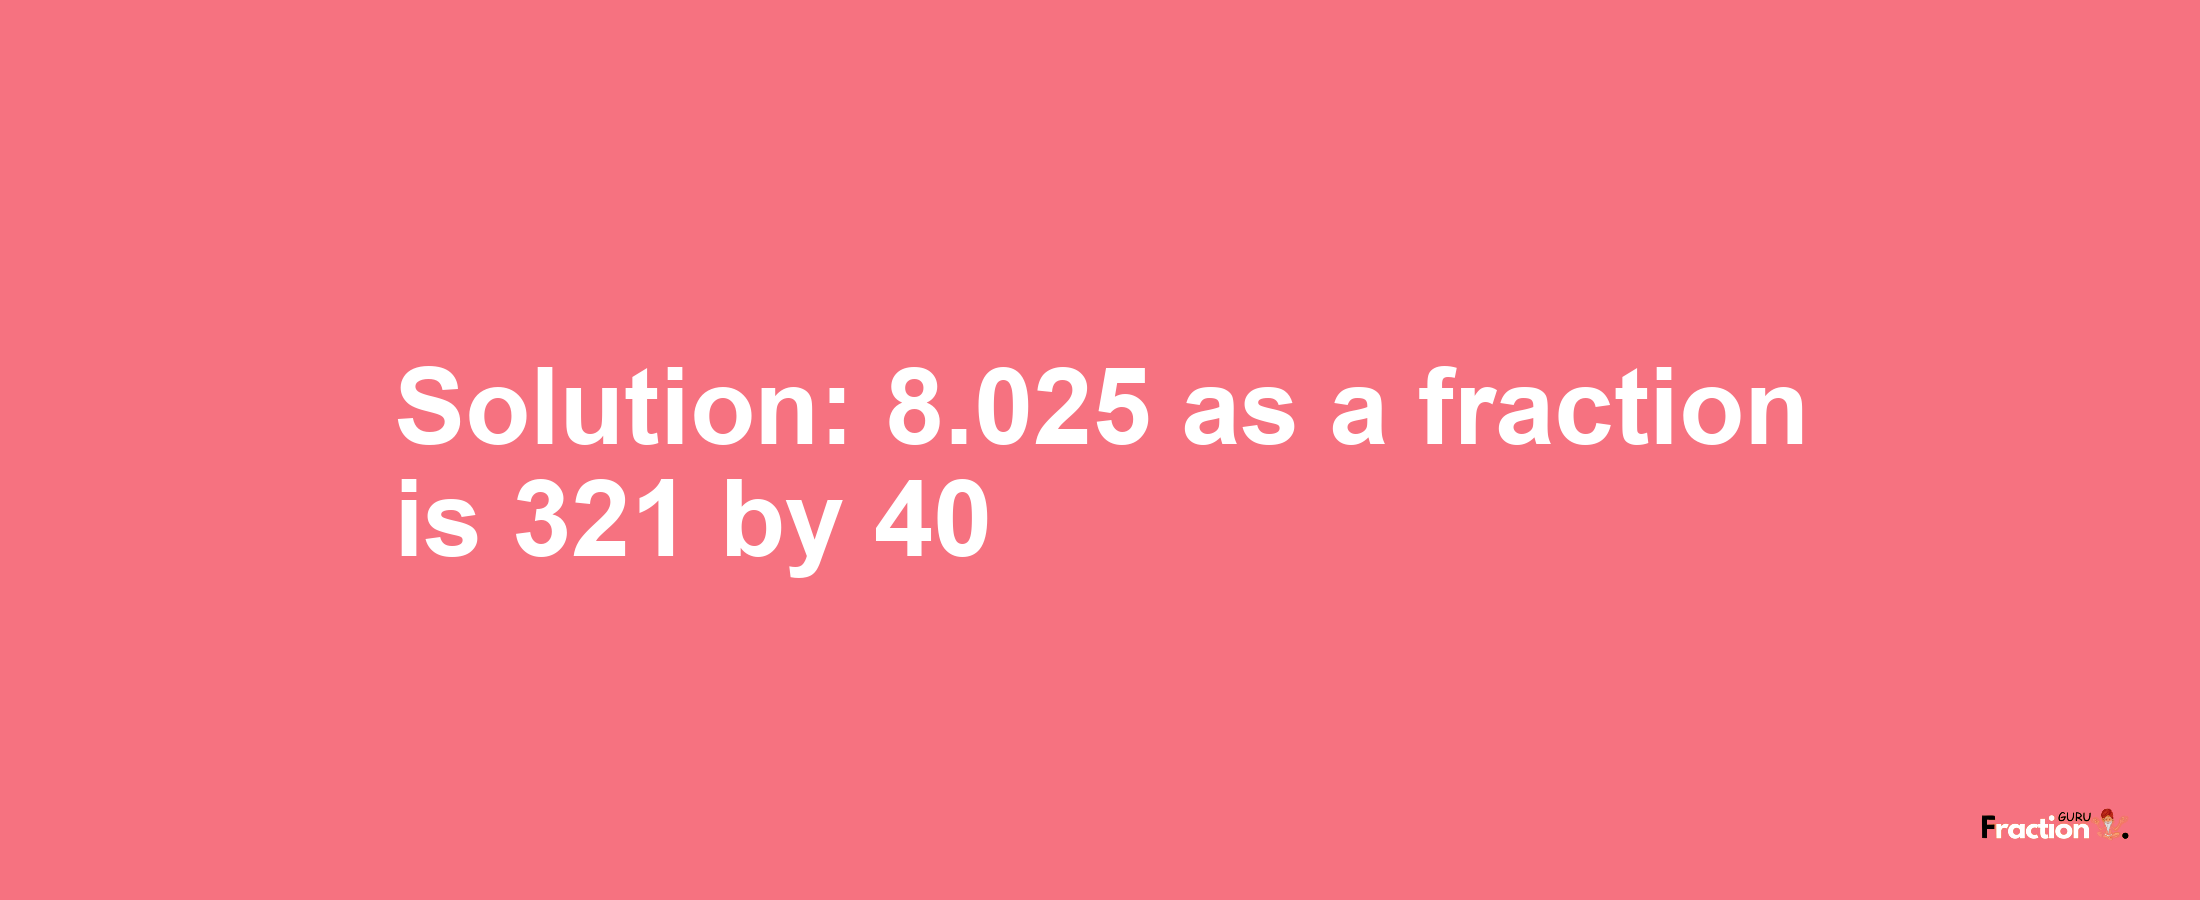 Solution:8.025 as a fraction is 321/40